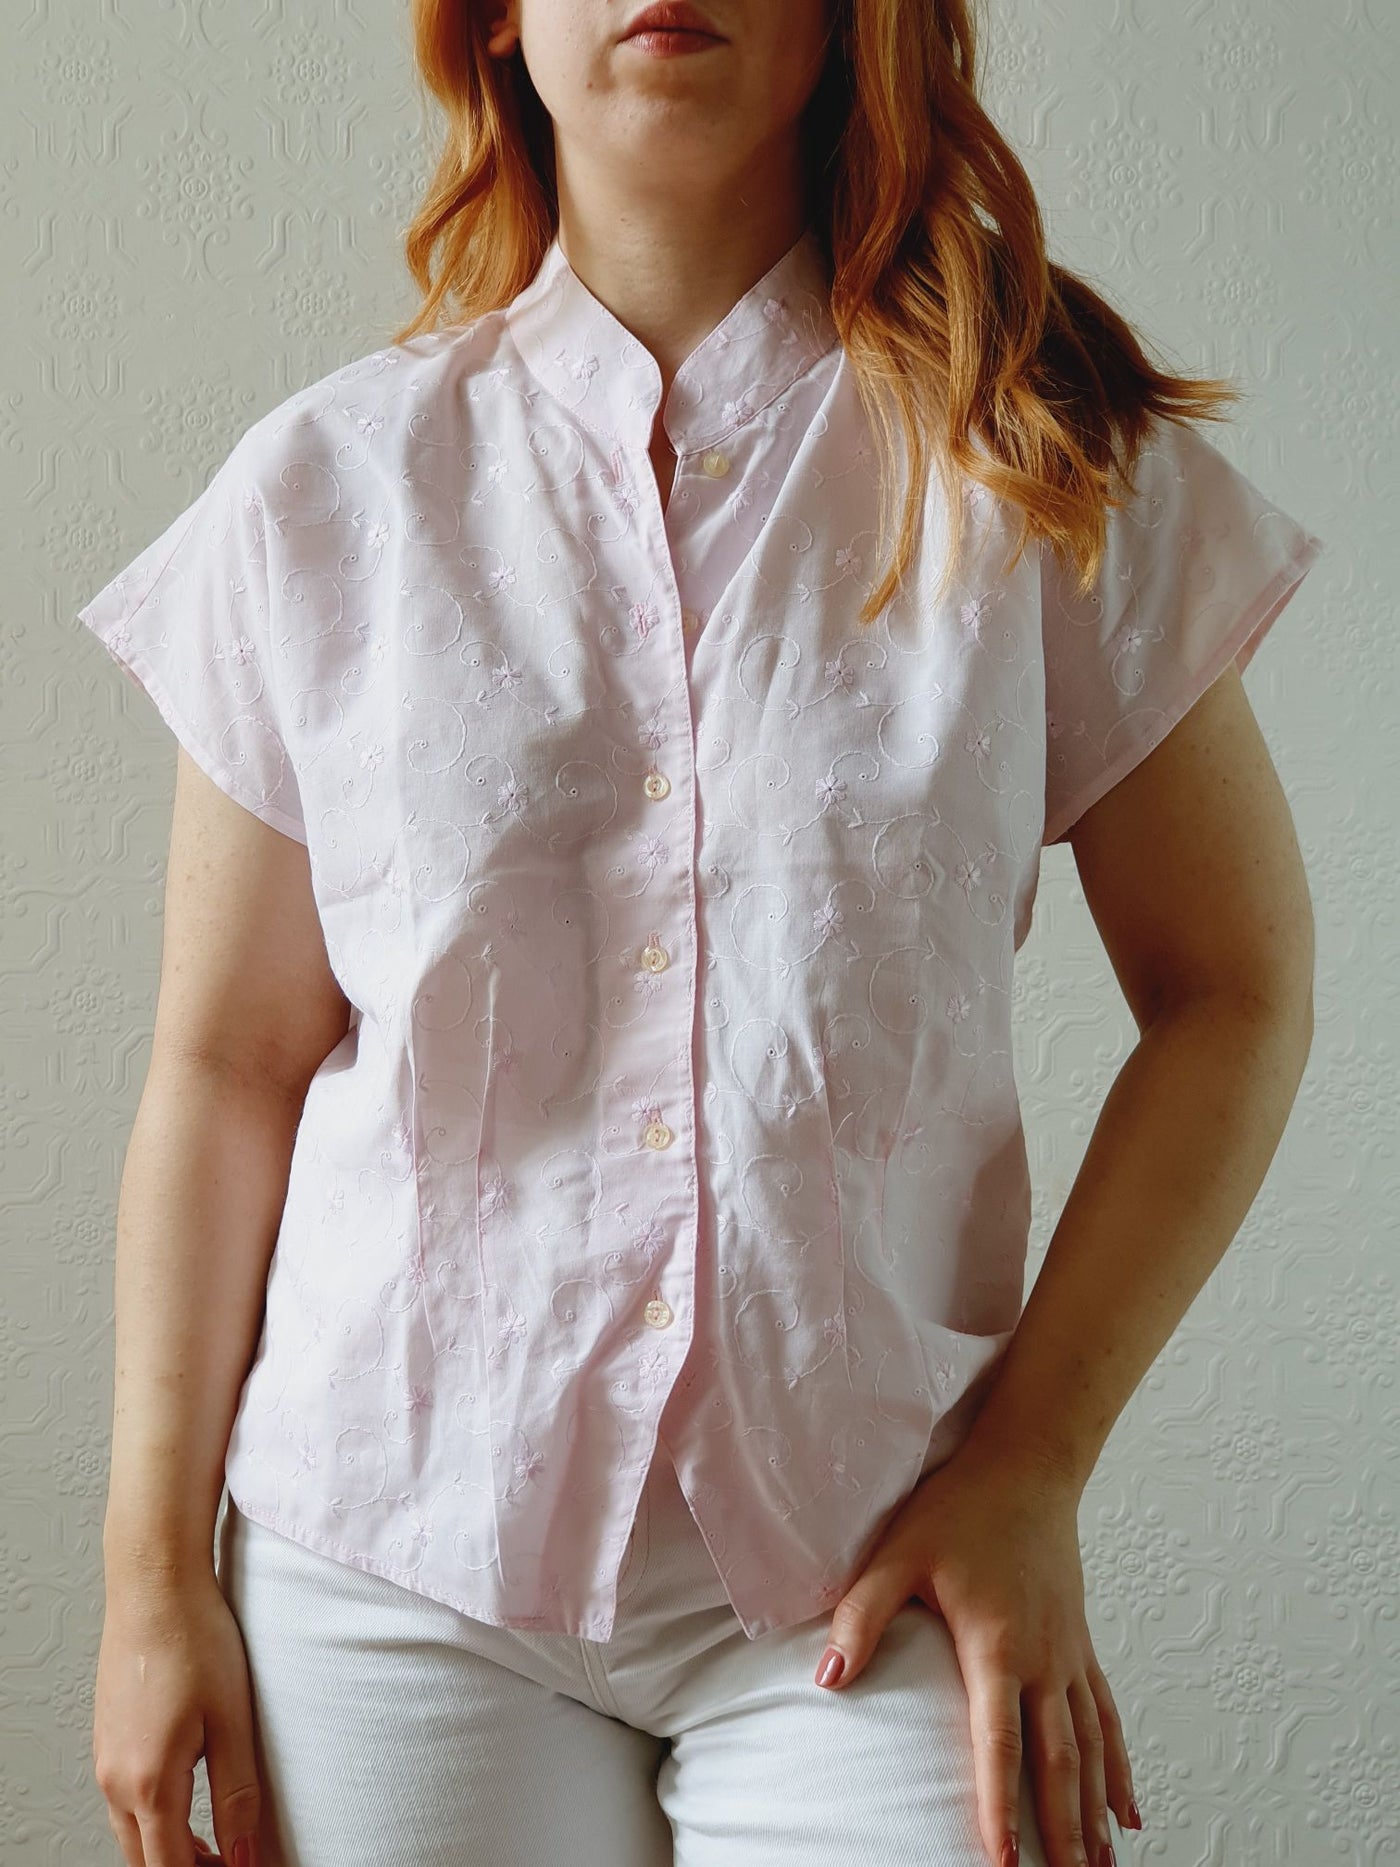 Vintage 80s Pale Pink Broderie Anglaise Blouse - S